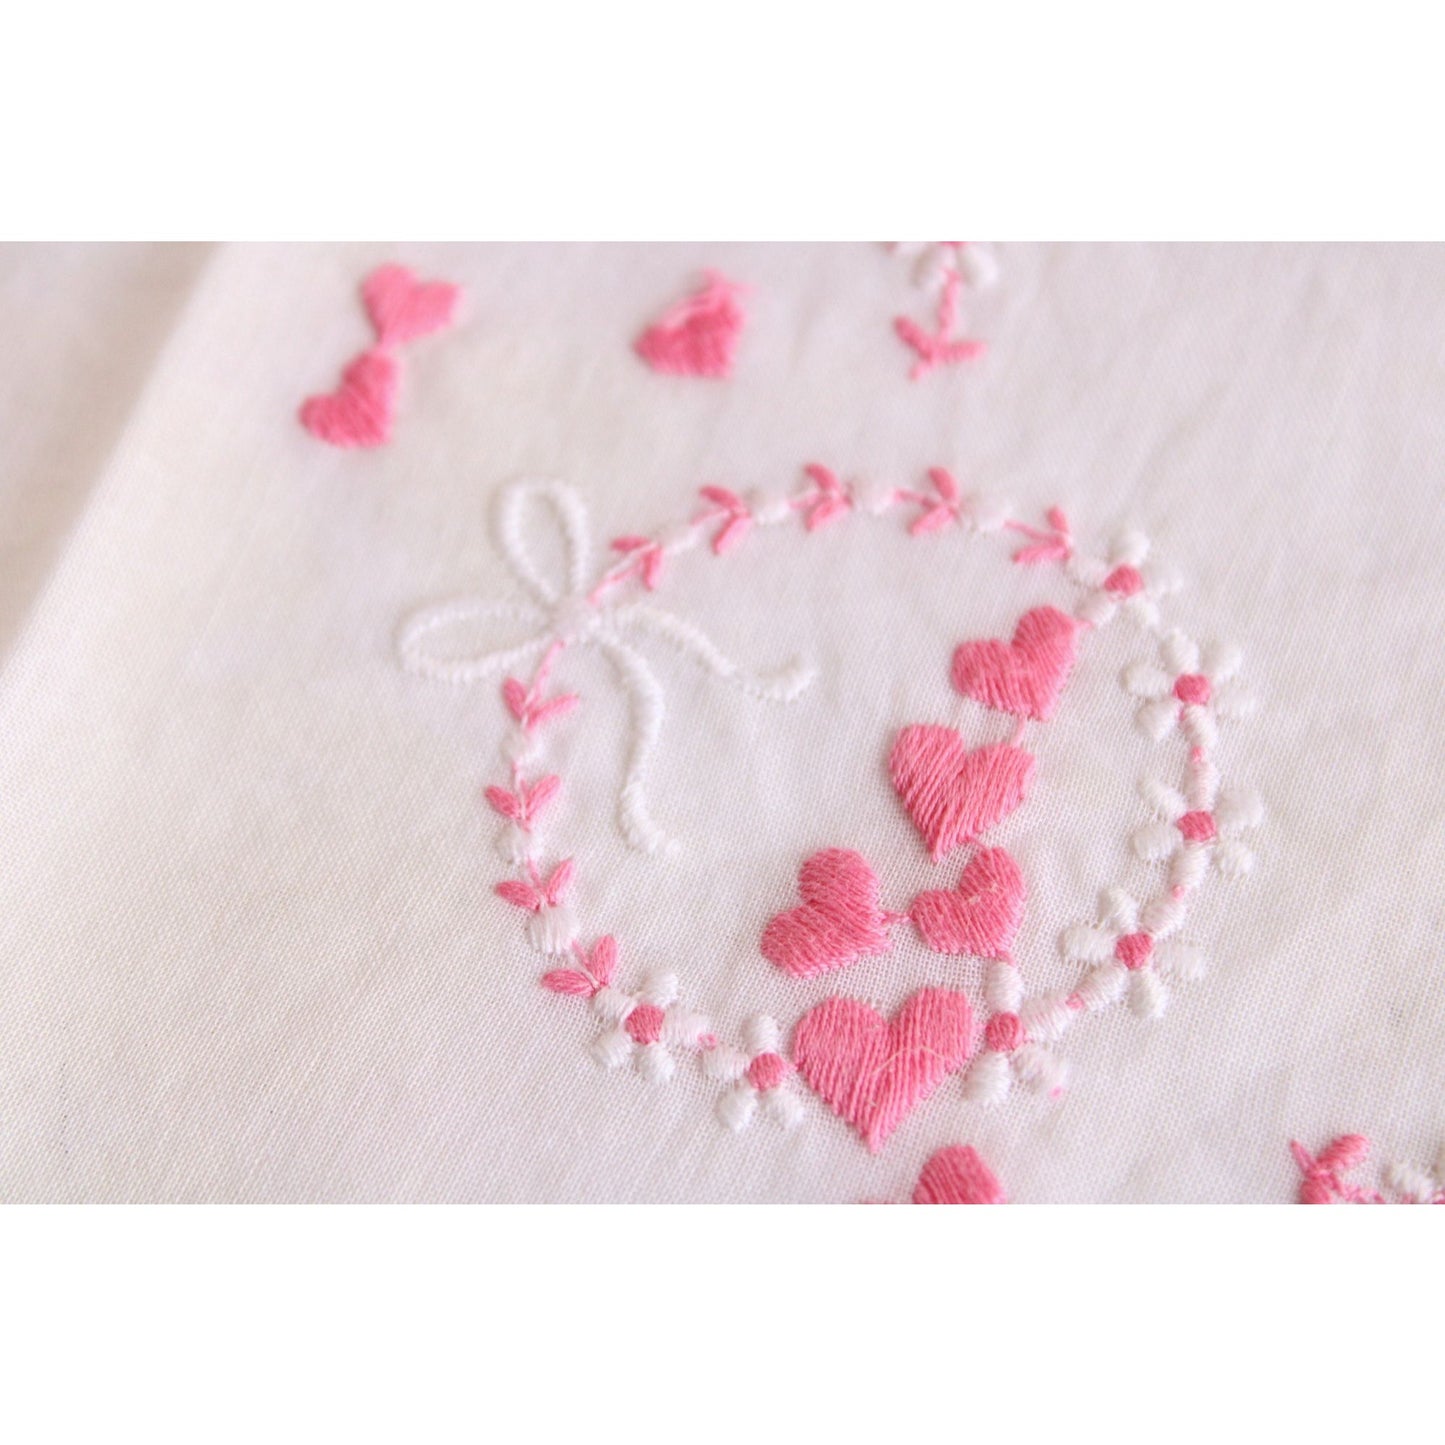 Vintage 1950s NOS White Linen With Pink Embroidered Hearts and Flowers Hanky